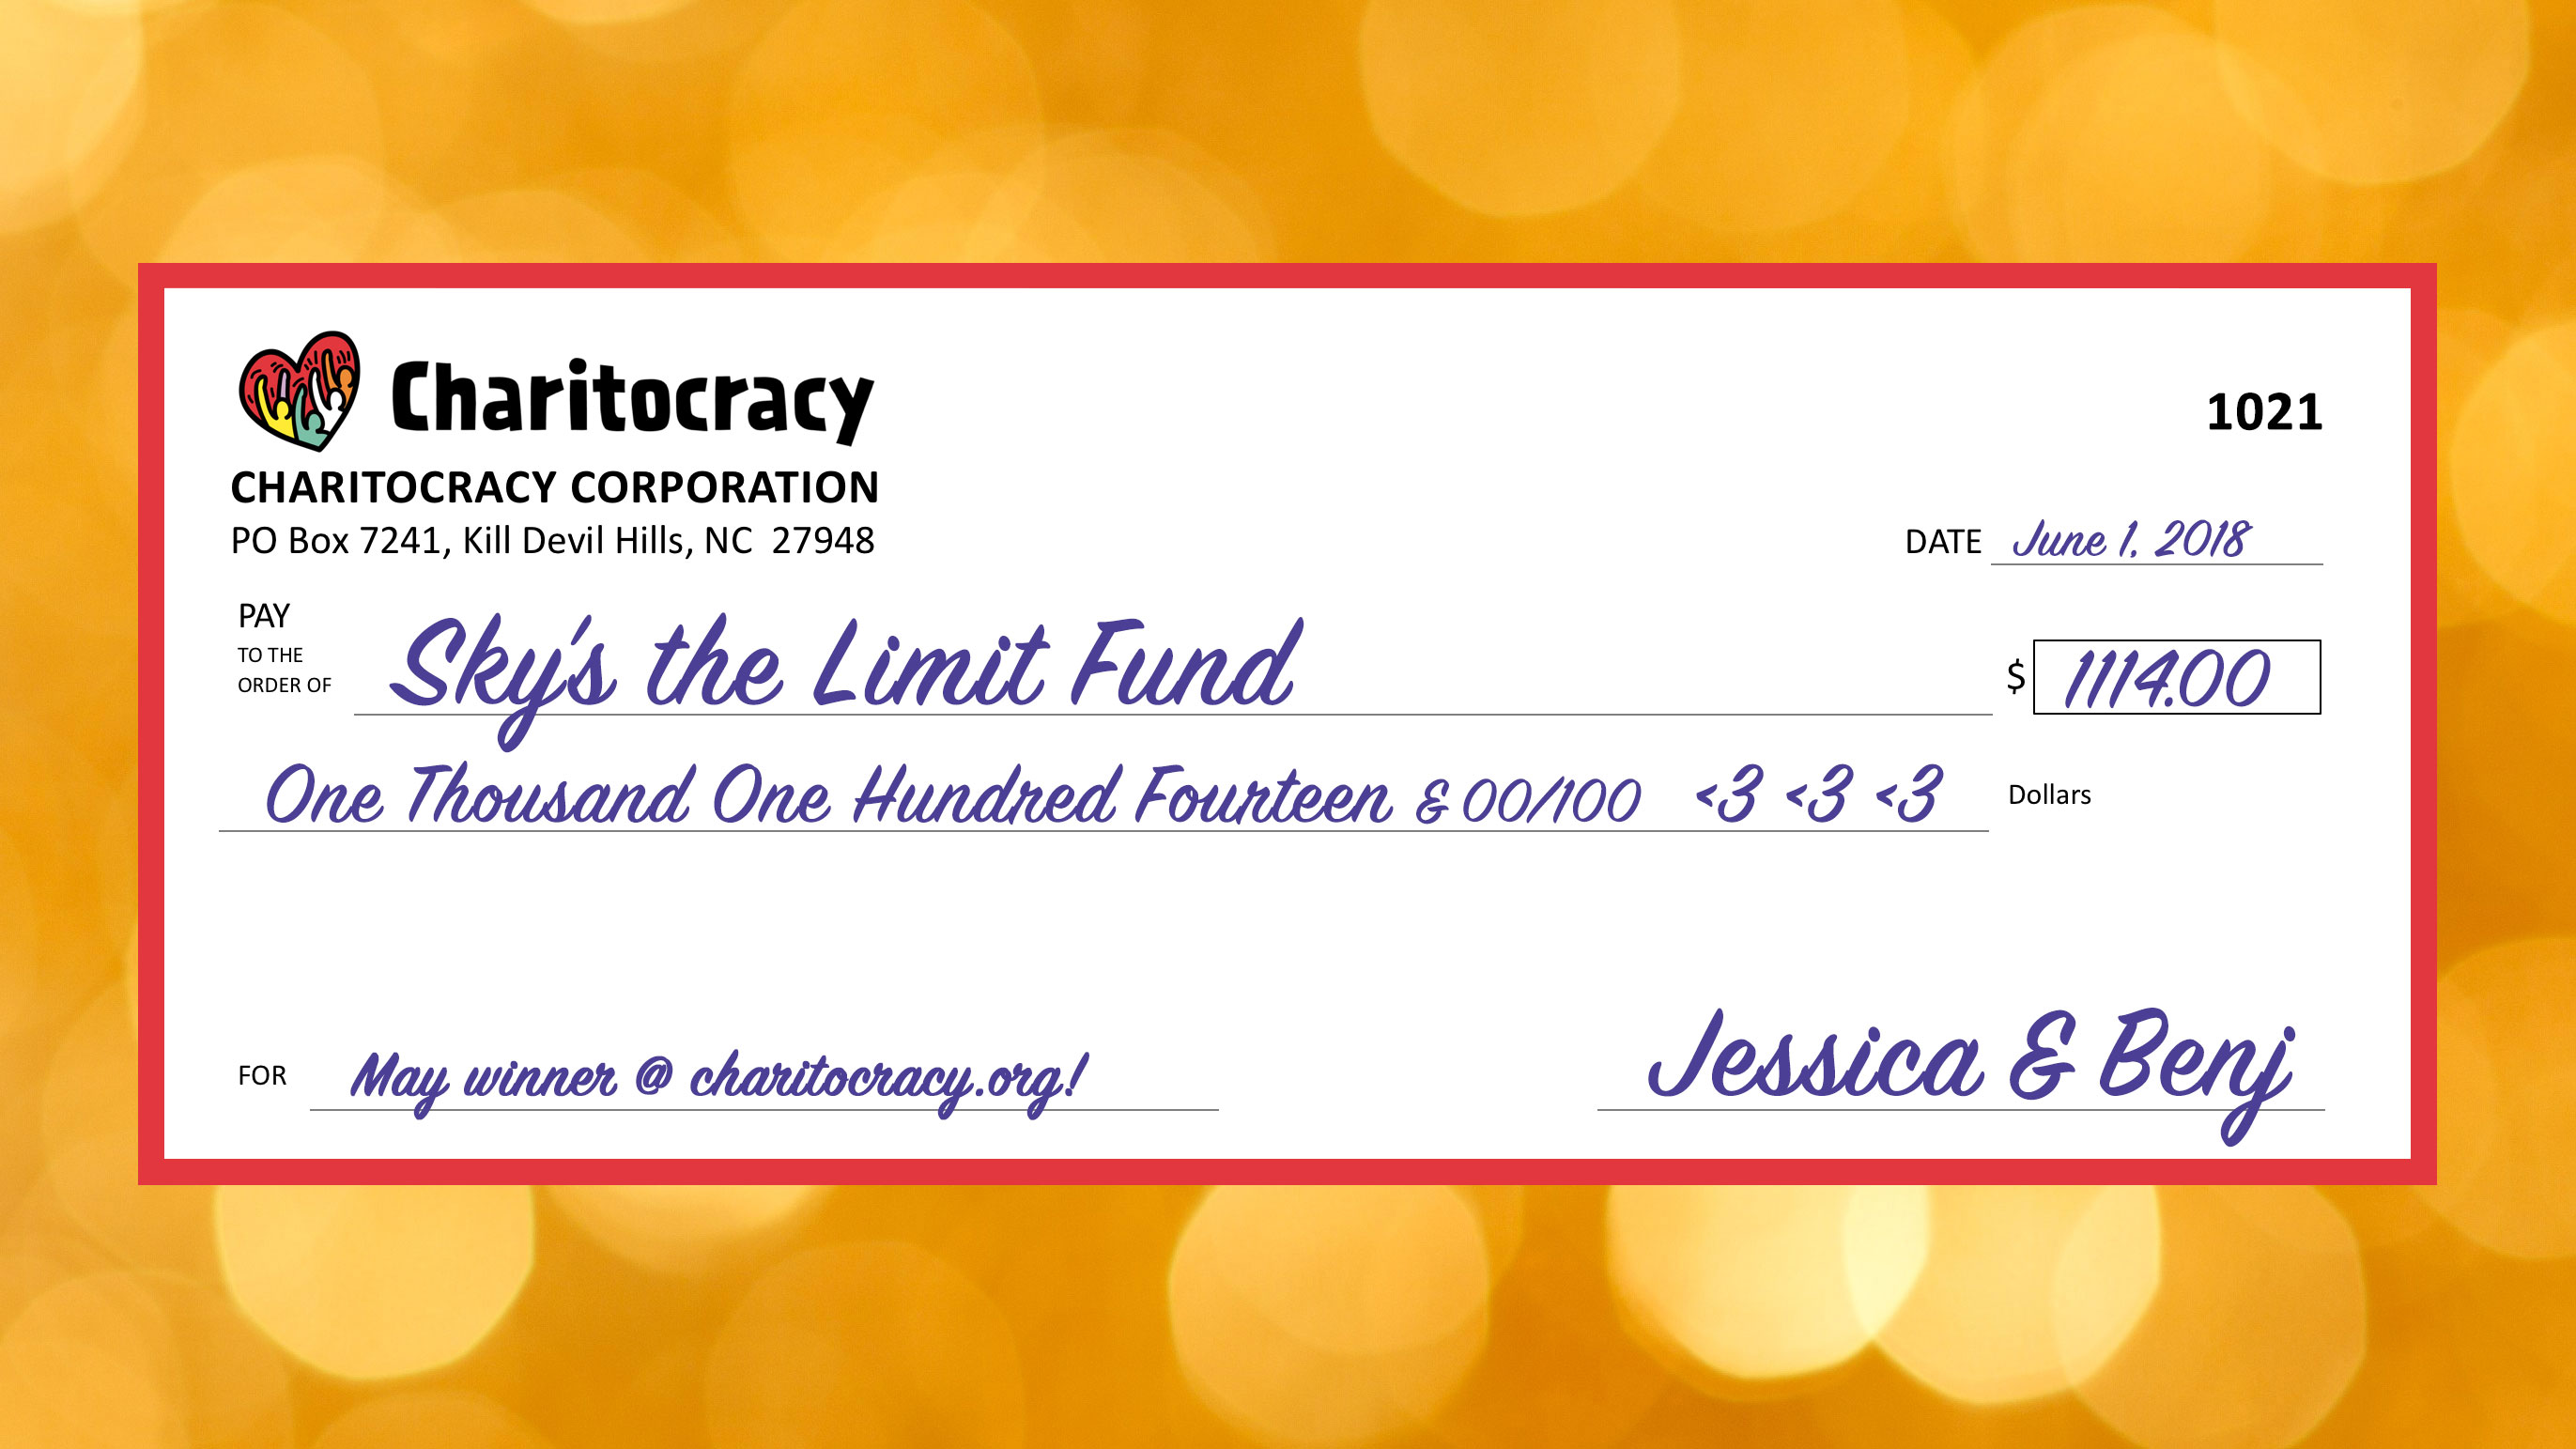 Charitocracy's 21st check to May winner Sky's the Limit Fund for $1114